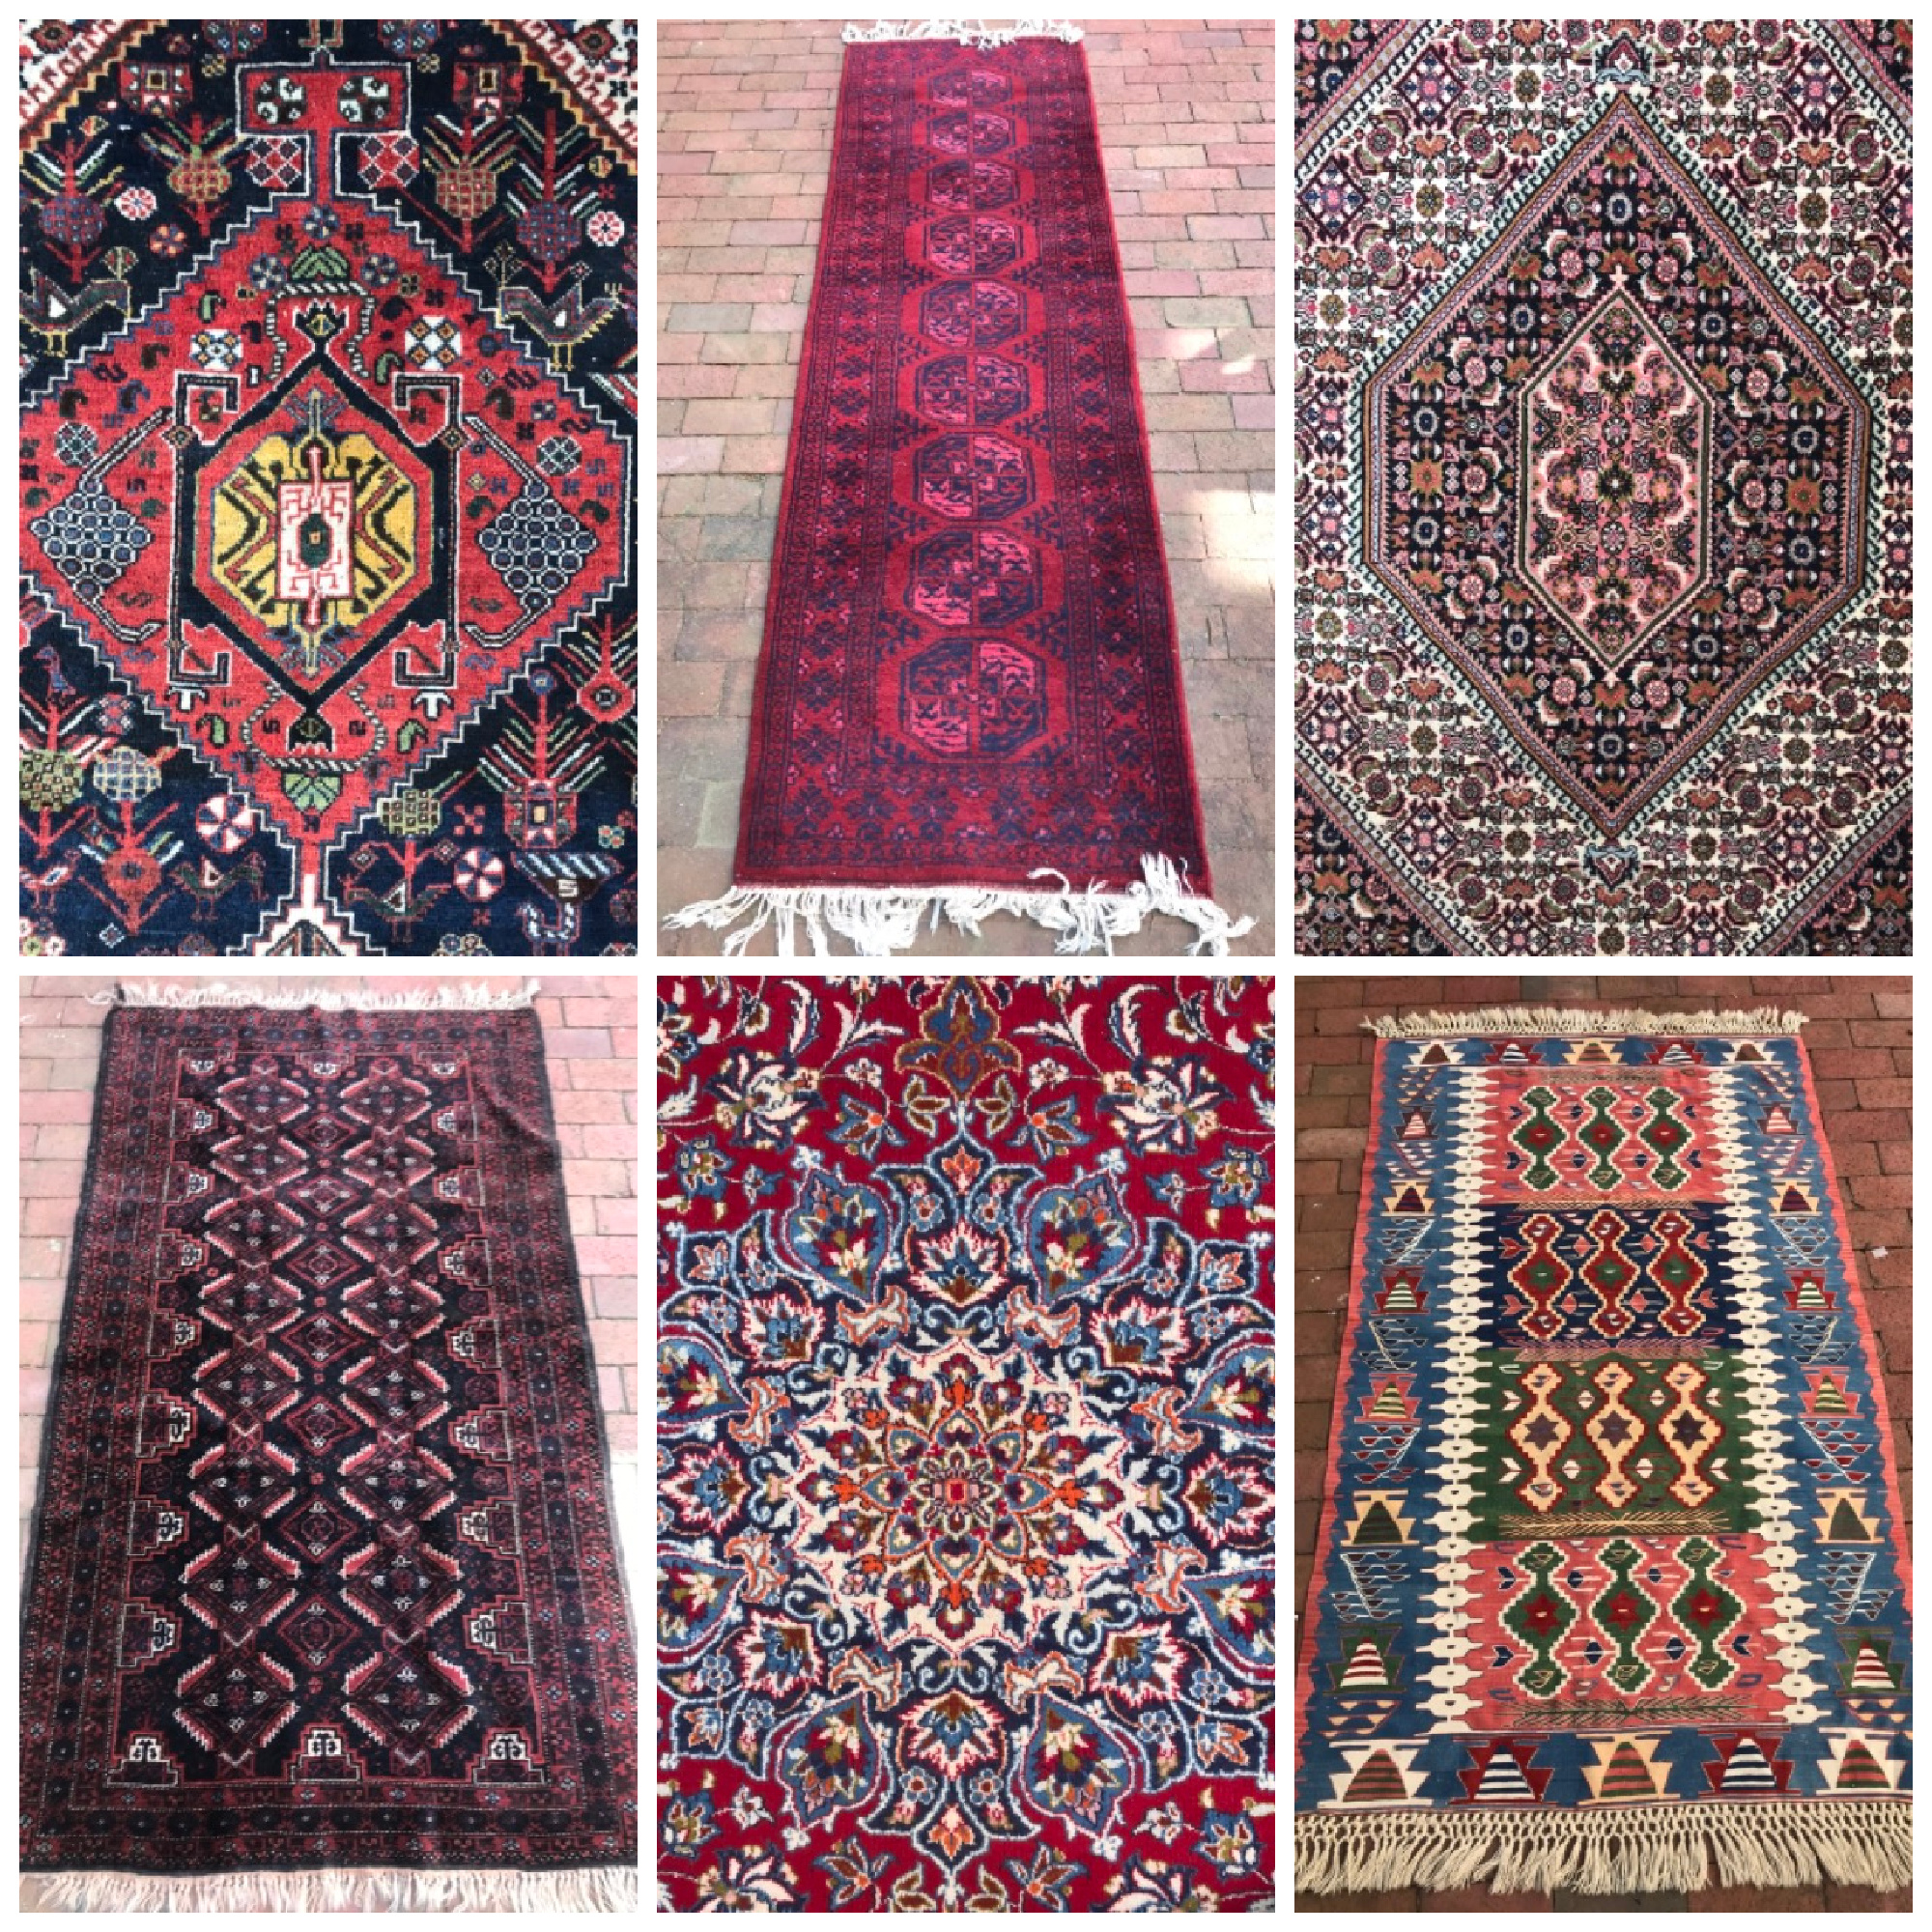 Spring Rug Auction